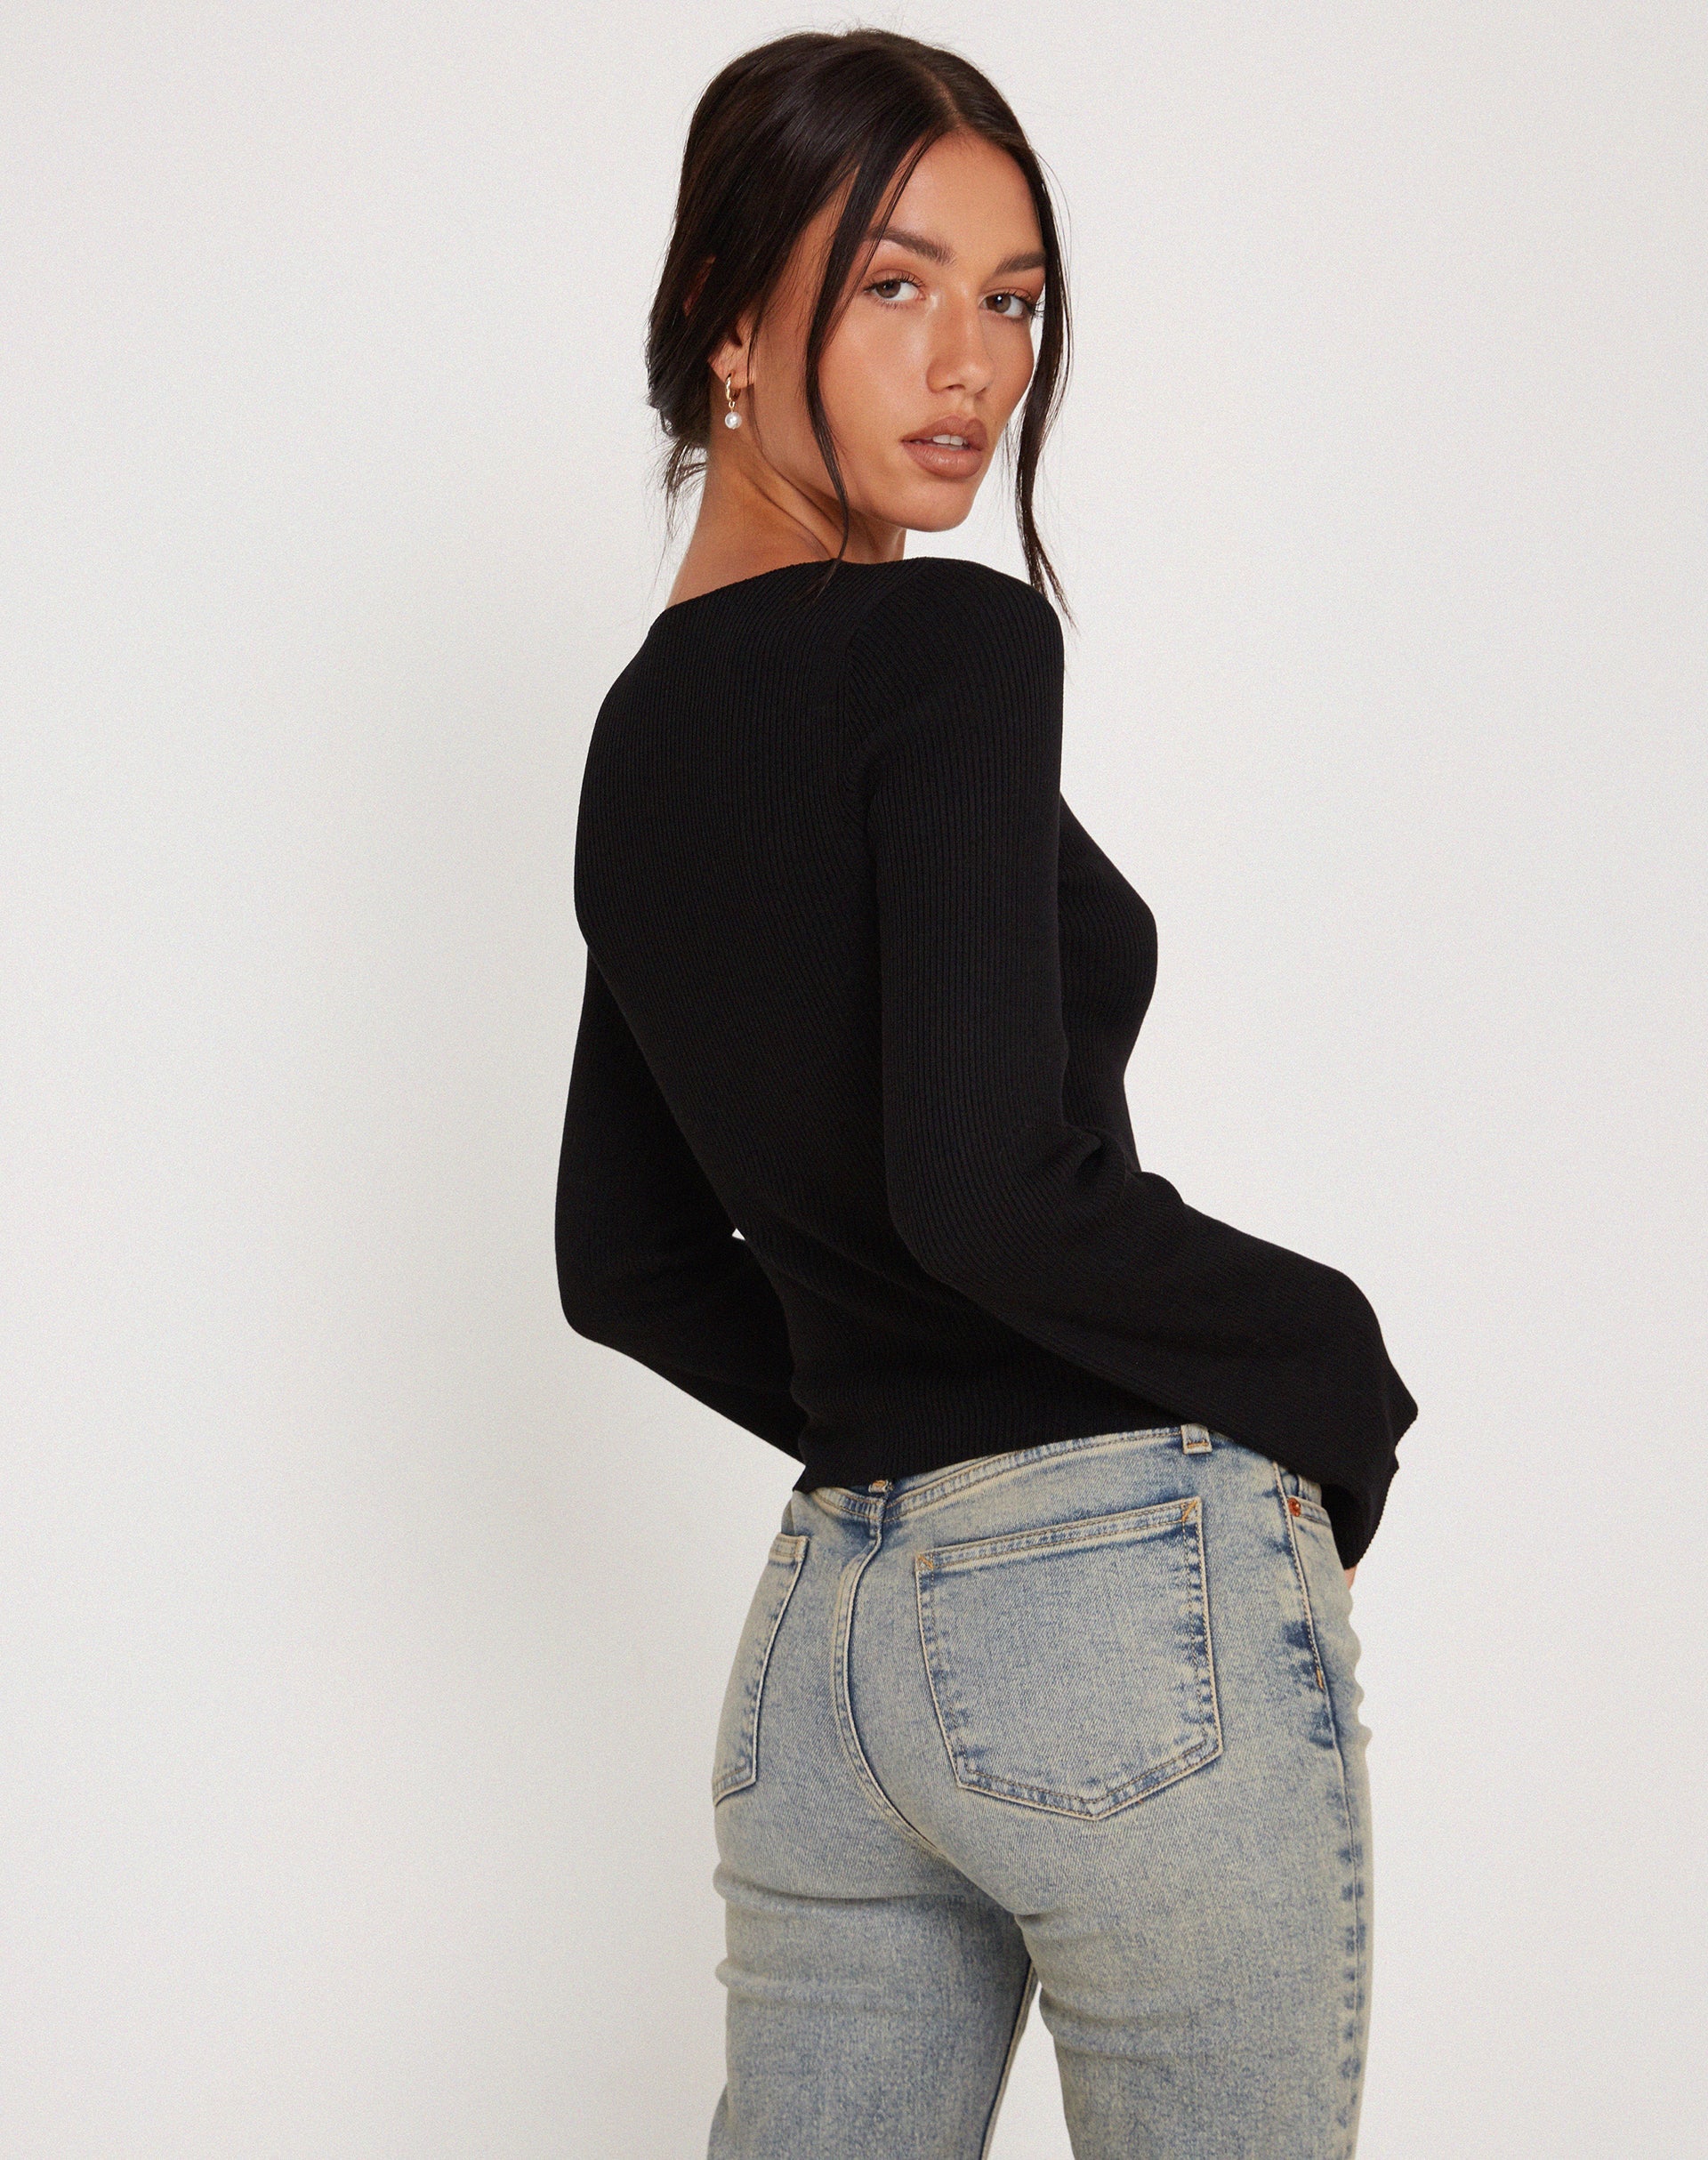 My love for lulu's long sleeved cut out crops continue with the